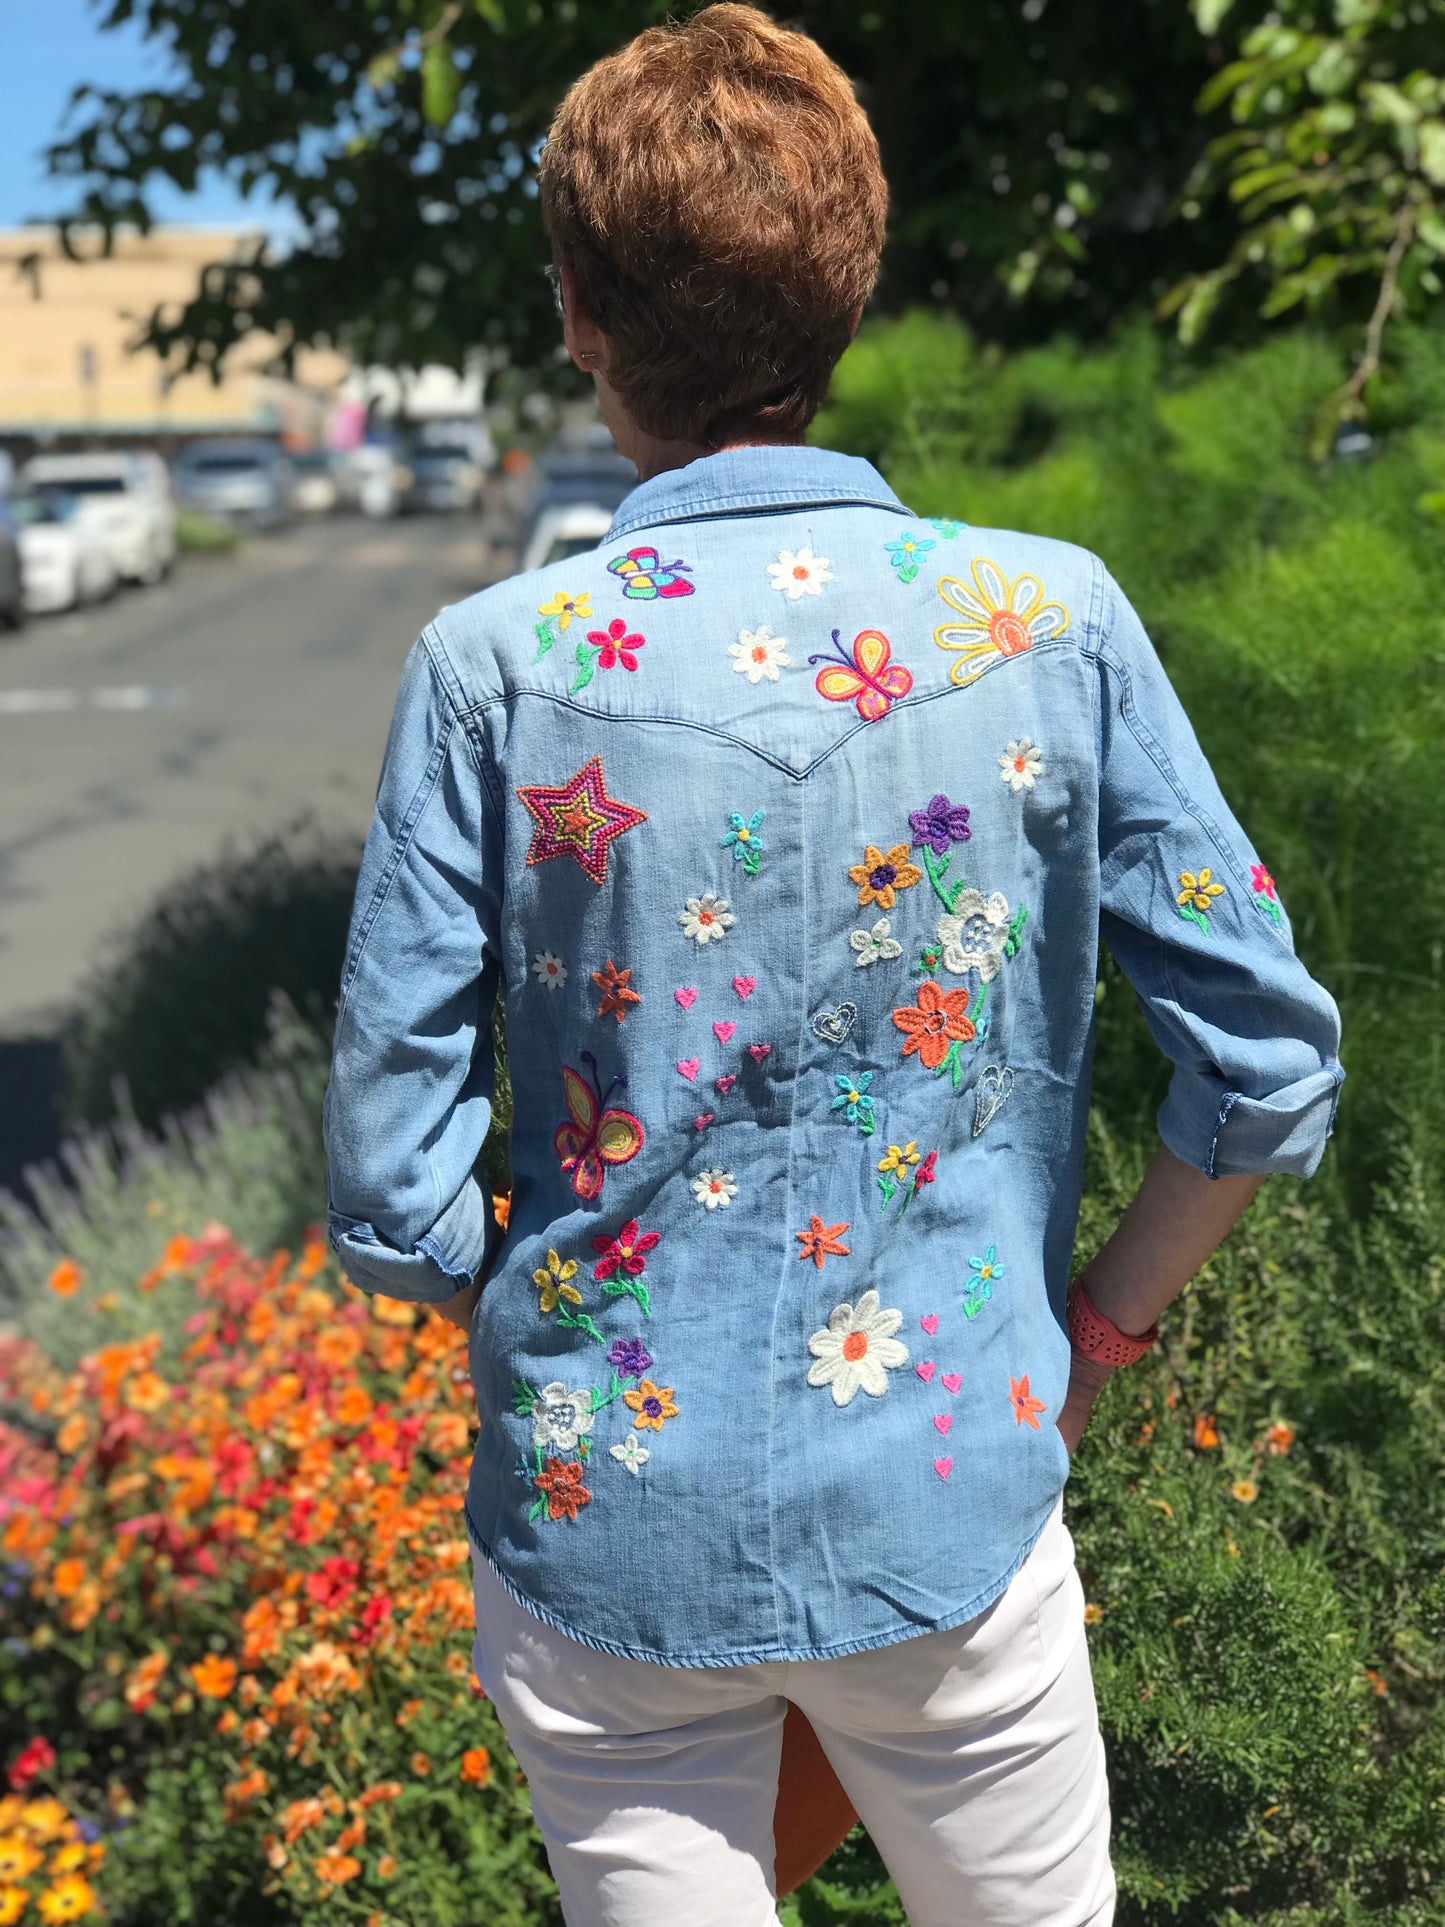 Kelly Sketchbook Star Butterfly & Floral Embroidery - Denim model in the street back